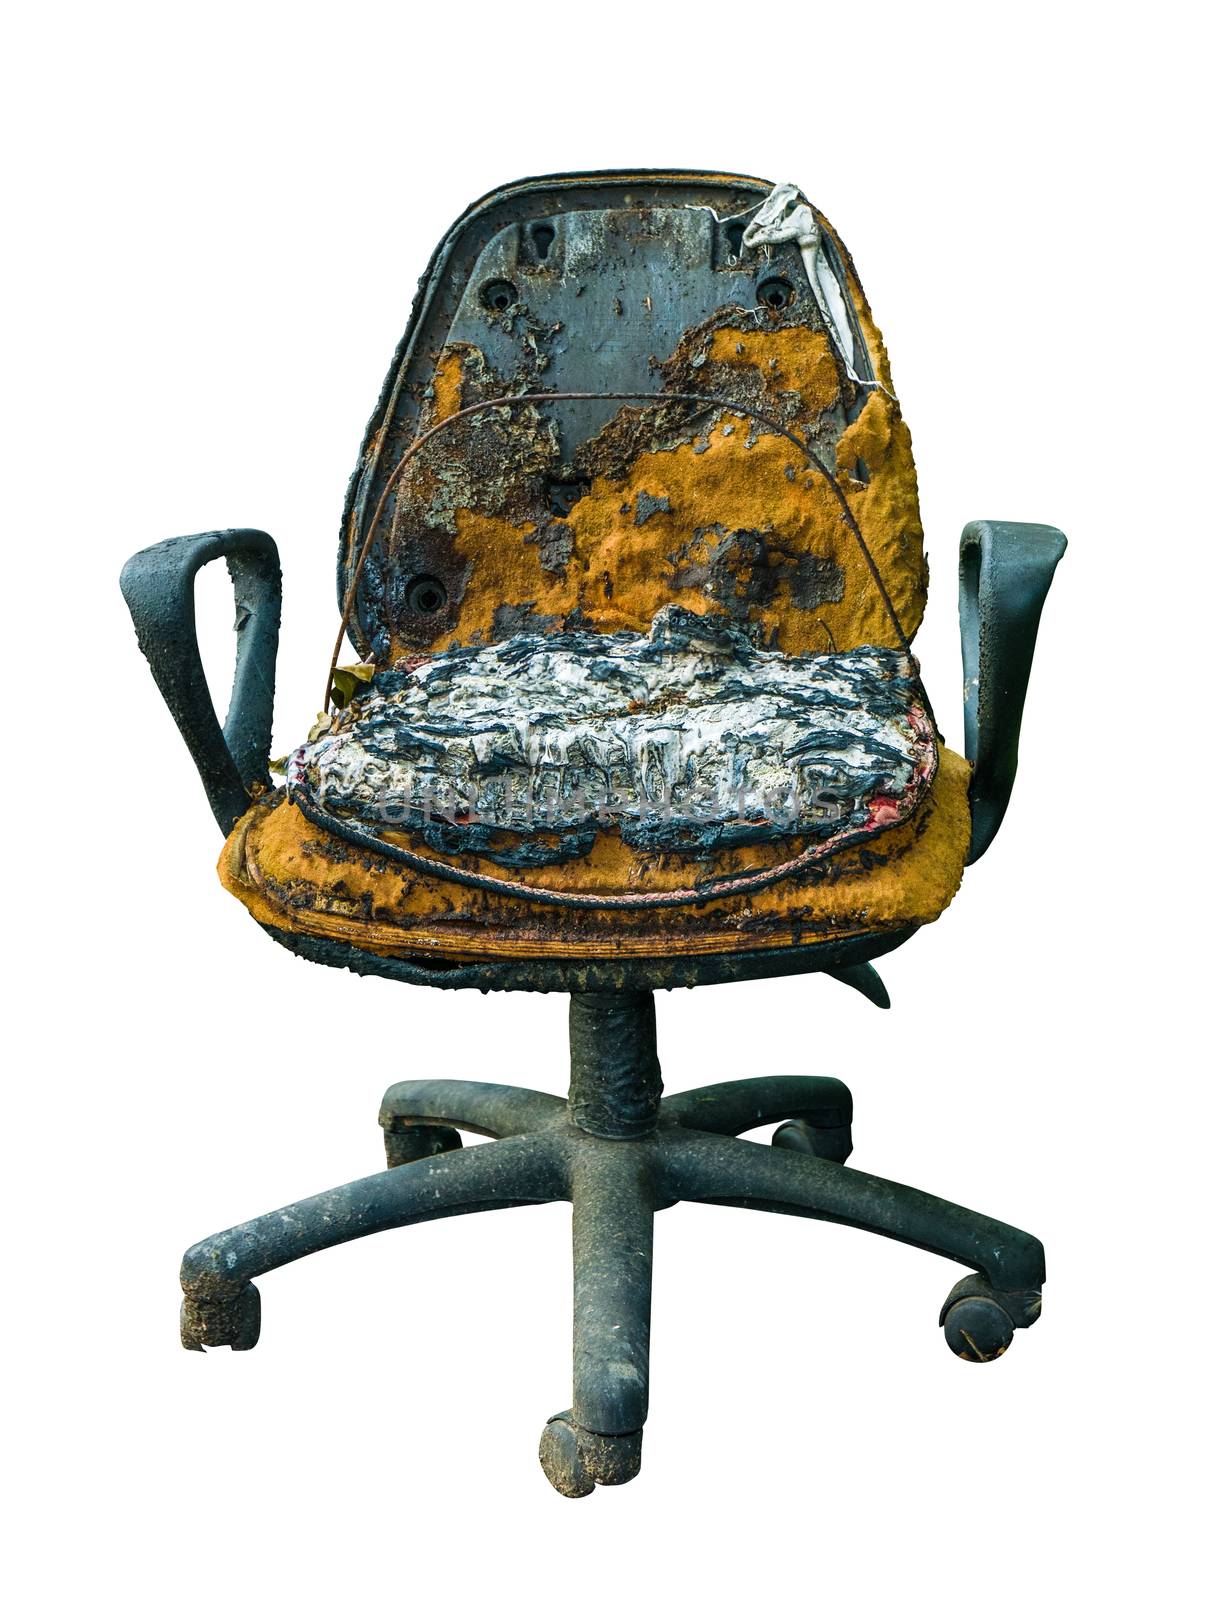 Grungy Damaged Office Chair by mrdoomits